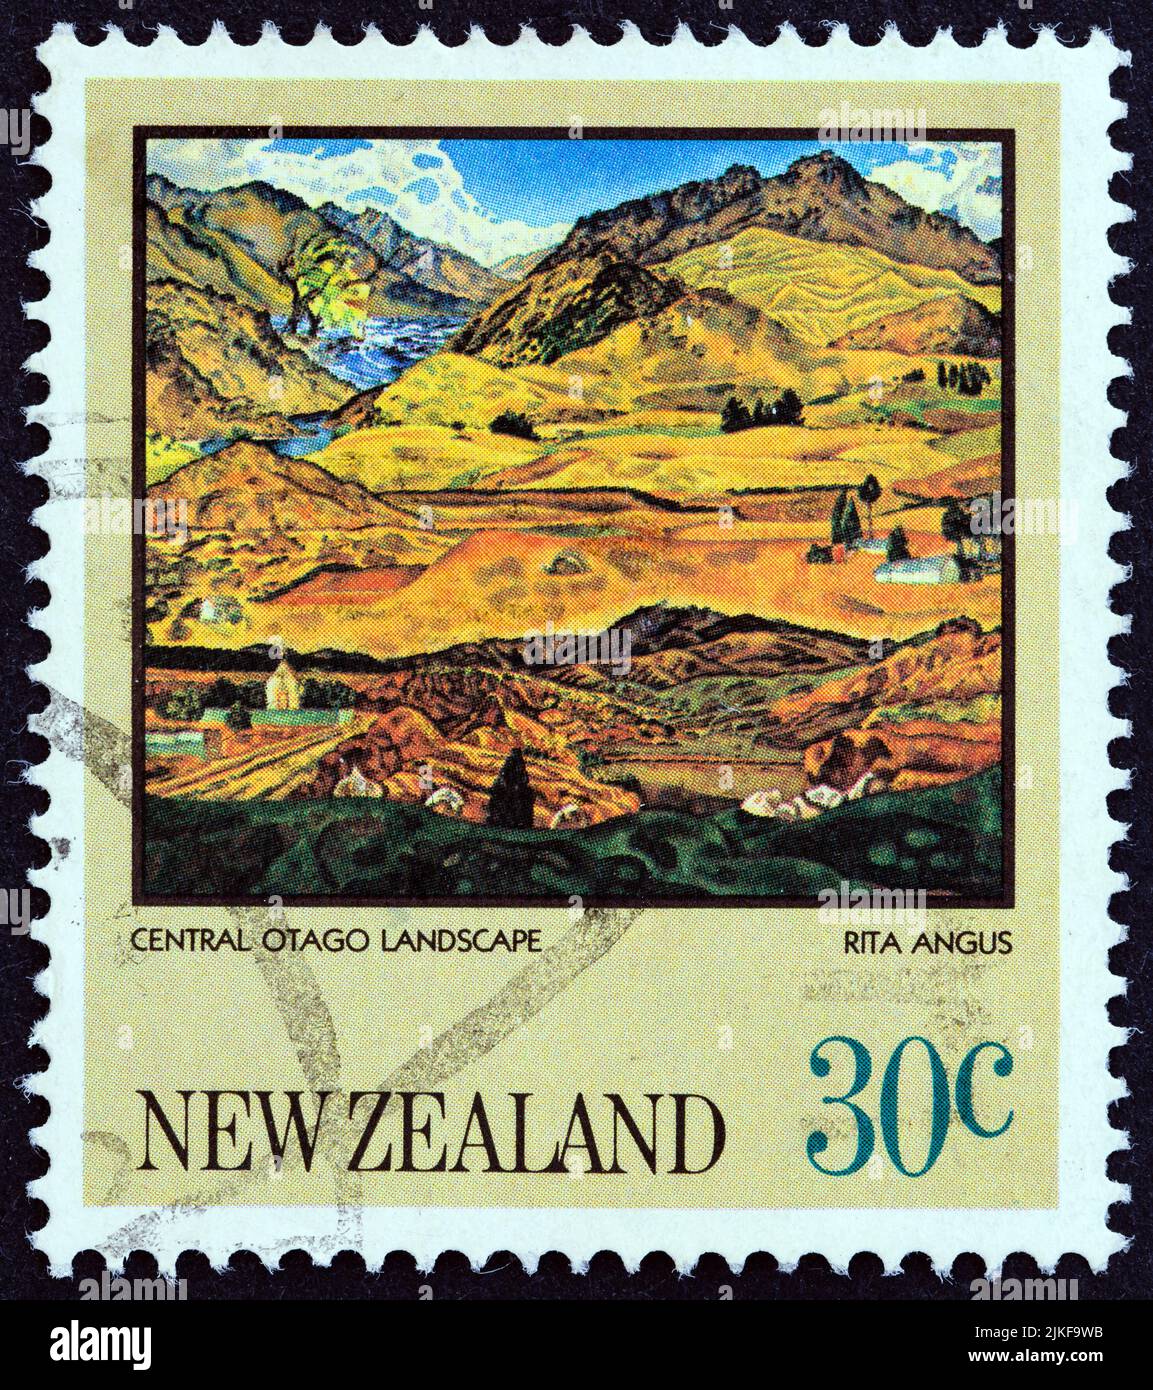 NEW ZEALAND - CIRCA 1983: A stamp printed in New Zealand from the 'Paintings by Rita Angus' issue shows Central Otago Landscape, circa 1983. Stock Photo